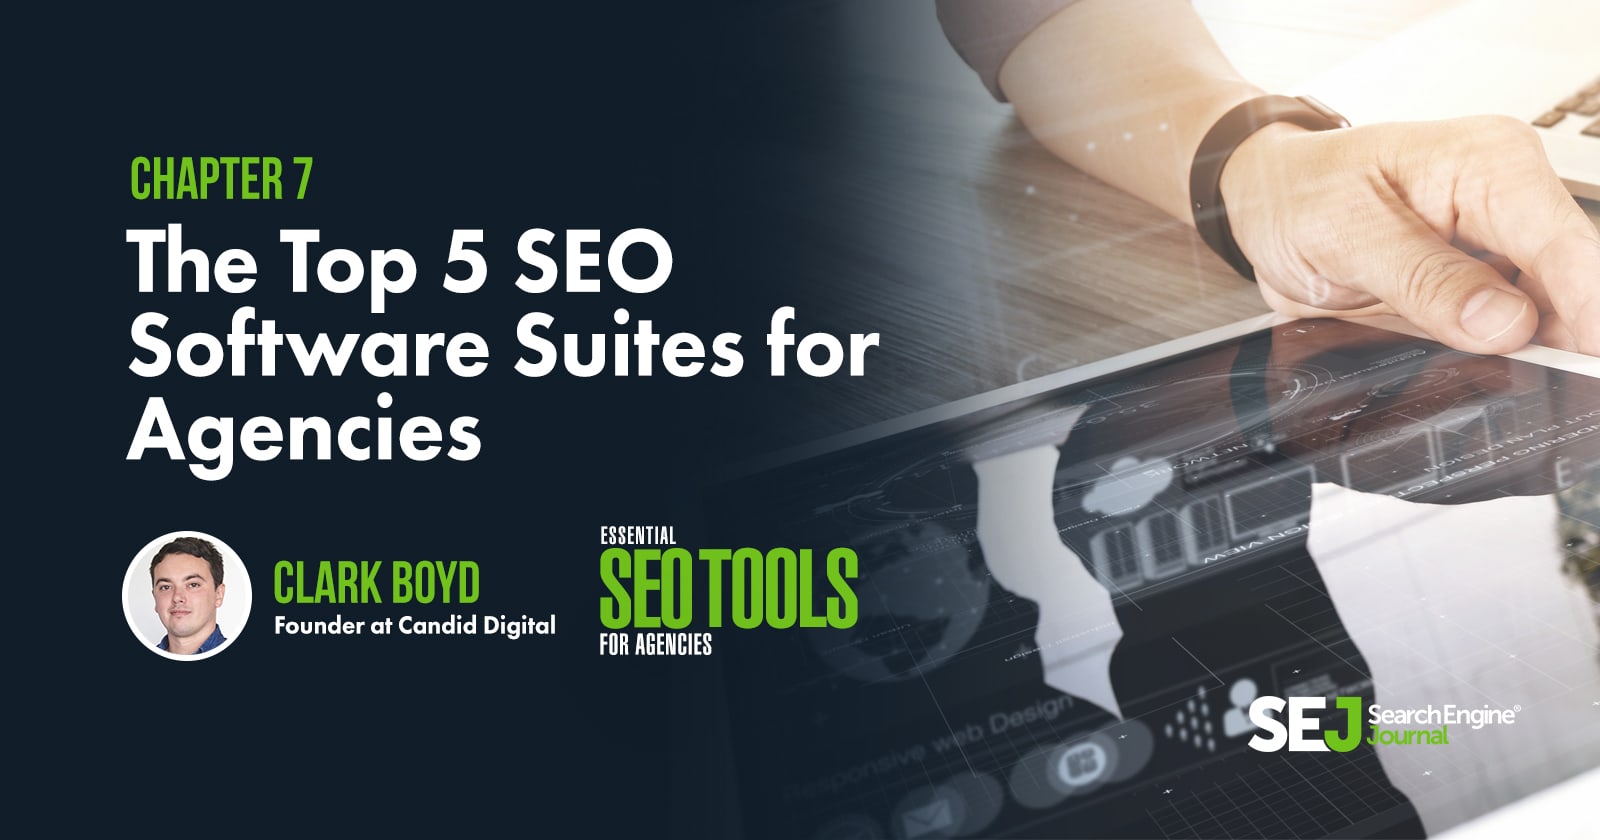 The Top 5 SEO Software Suites for Agencies